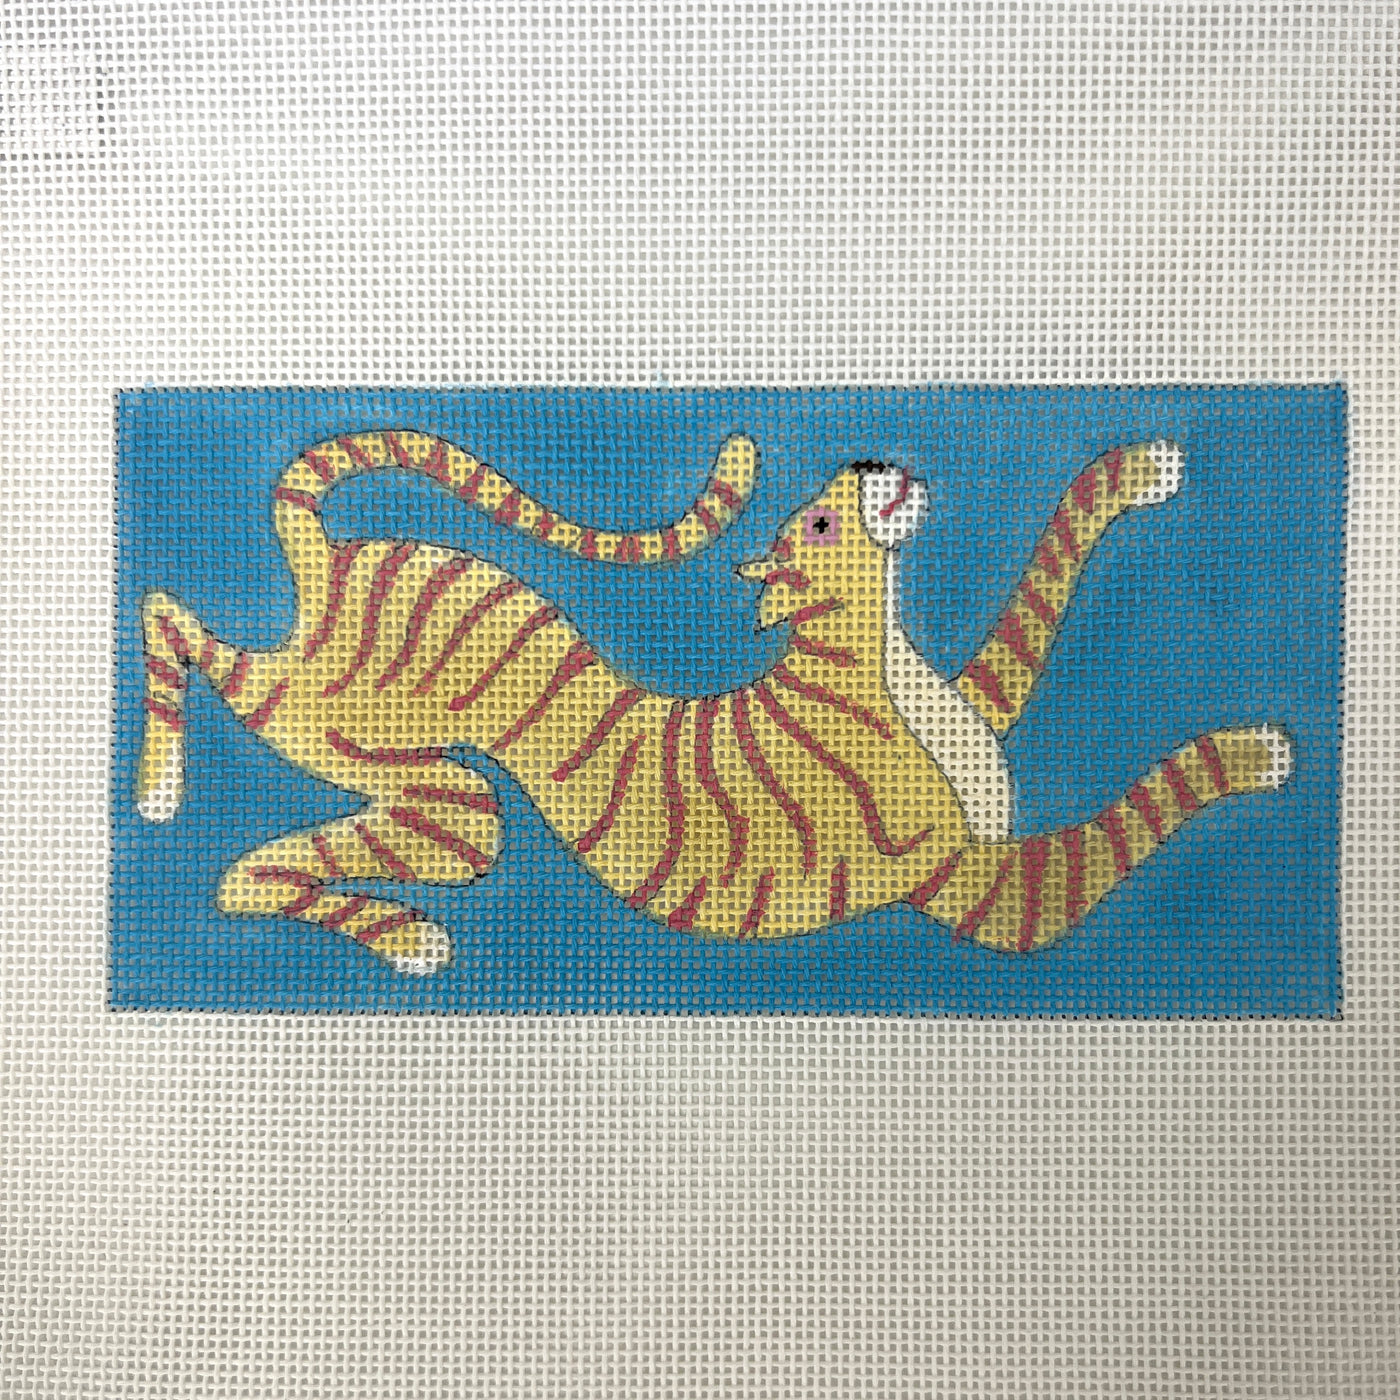 Whimsy Tiger Needlepoint Canvas